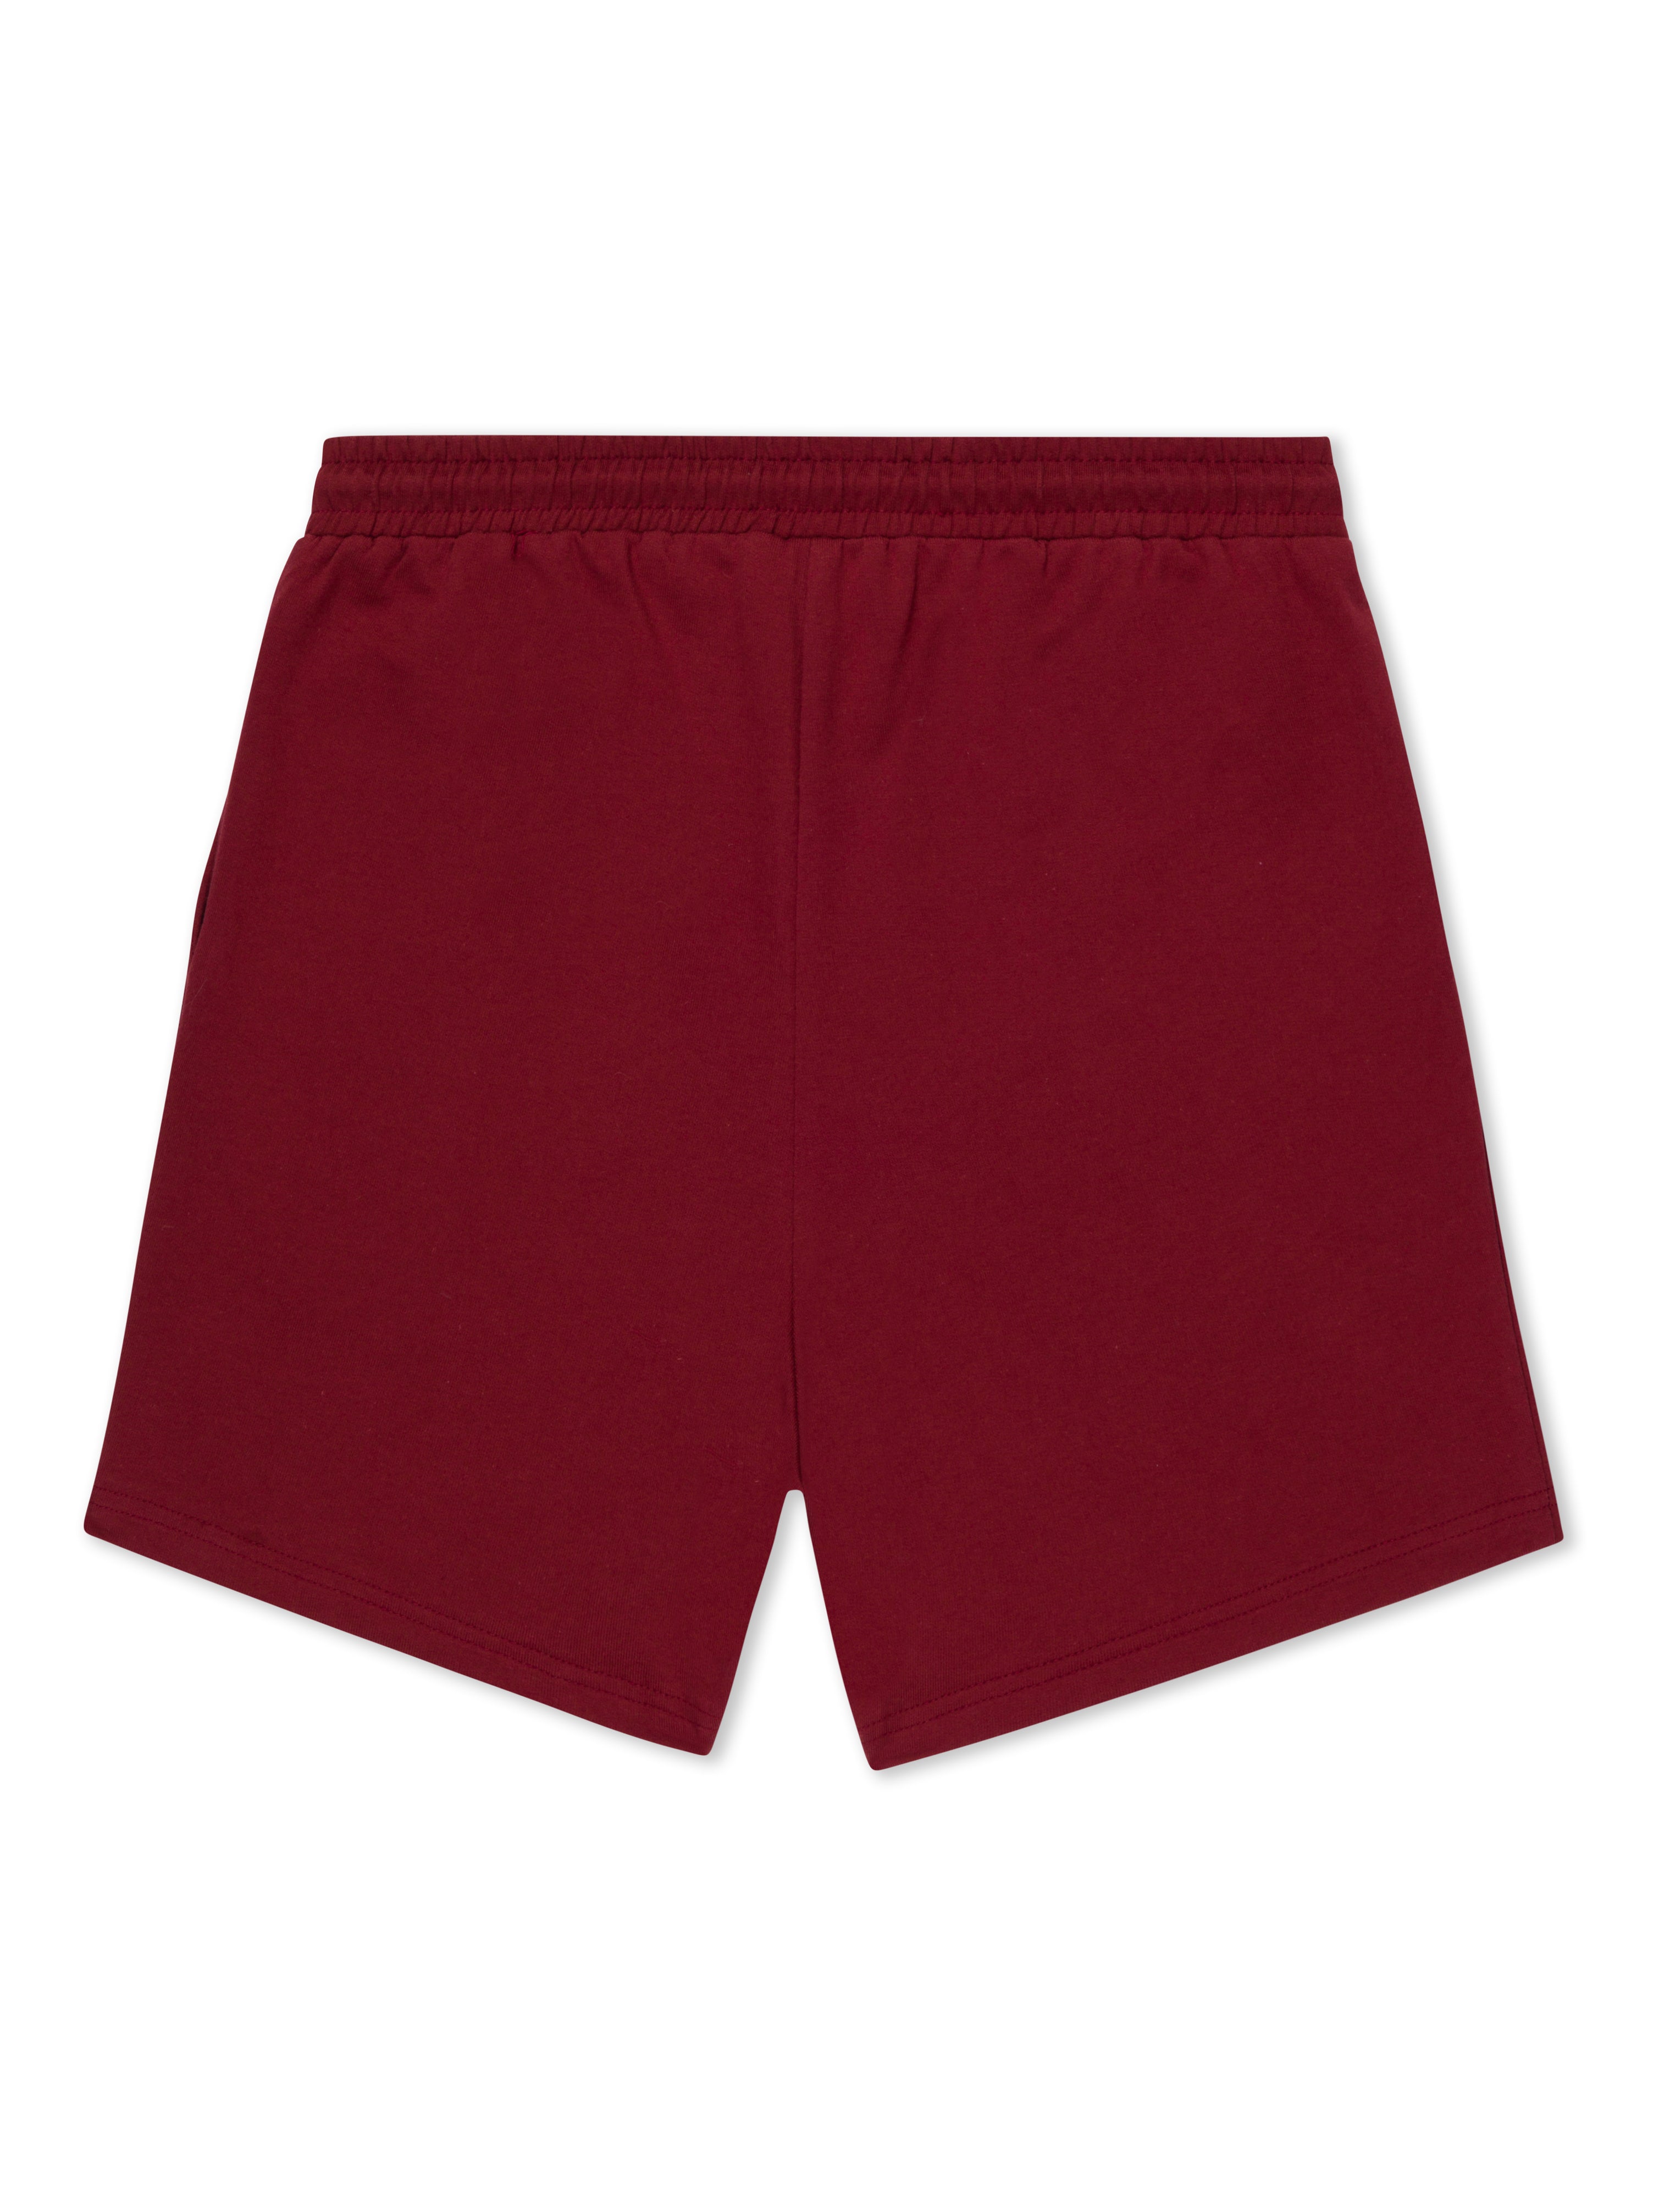 the back of a pair of red cotton gym shorts made of natural fibres